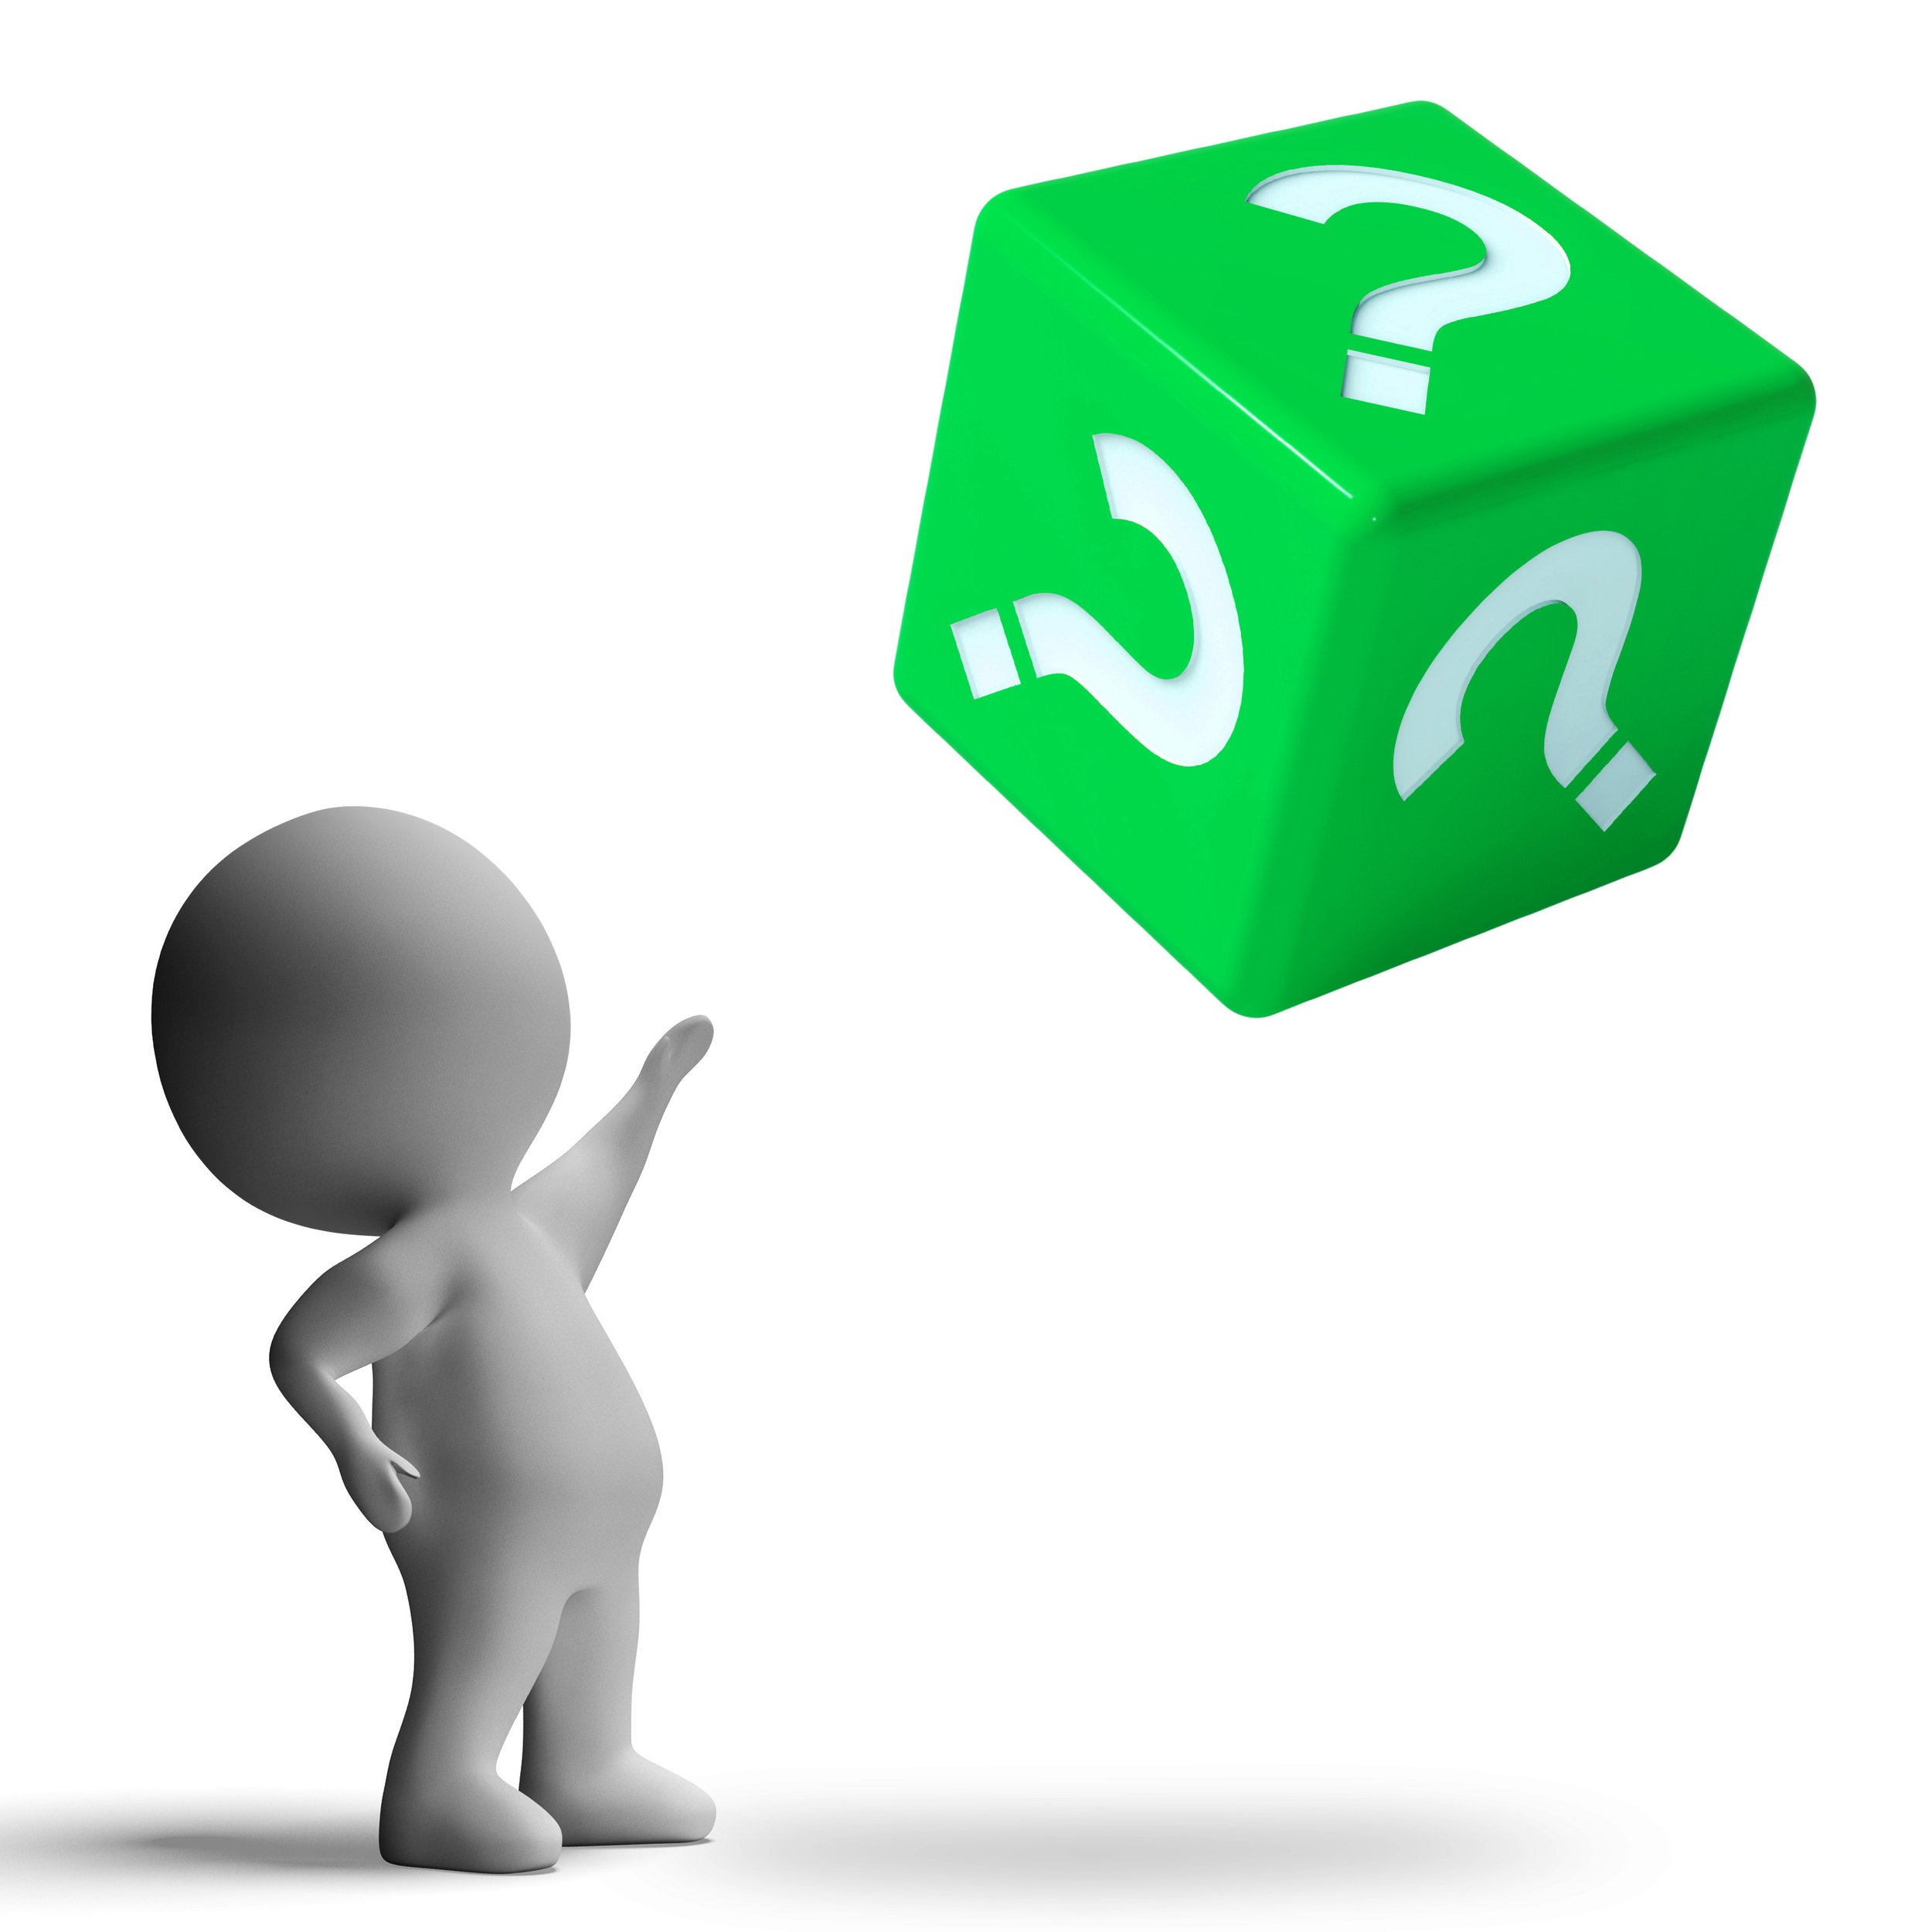 question-mark-on-dice-showing-confusion-SBI-300182155.jpg